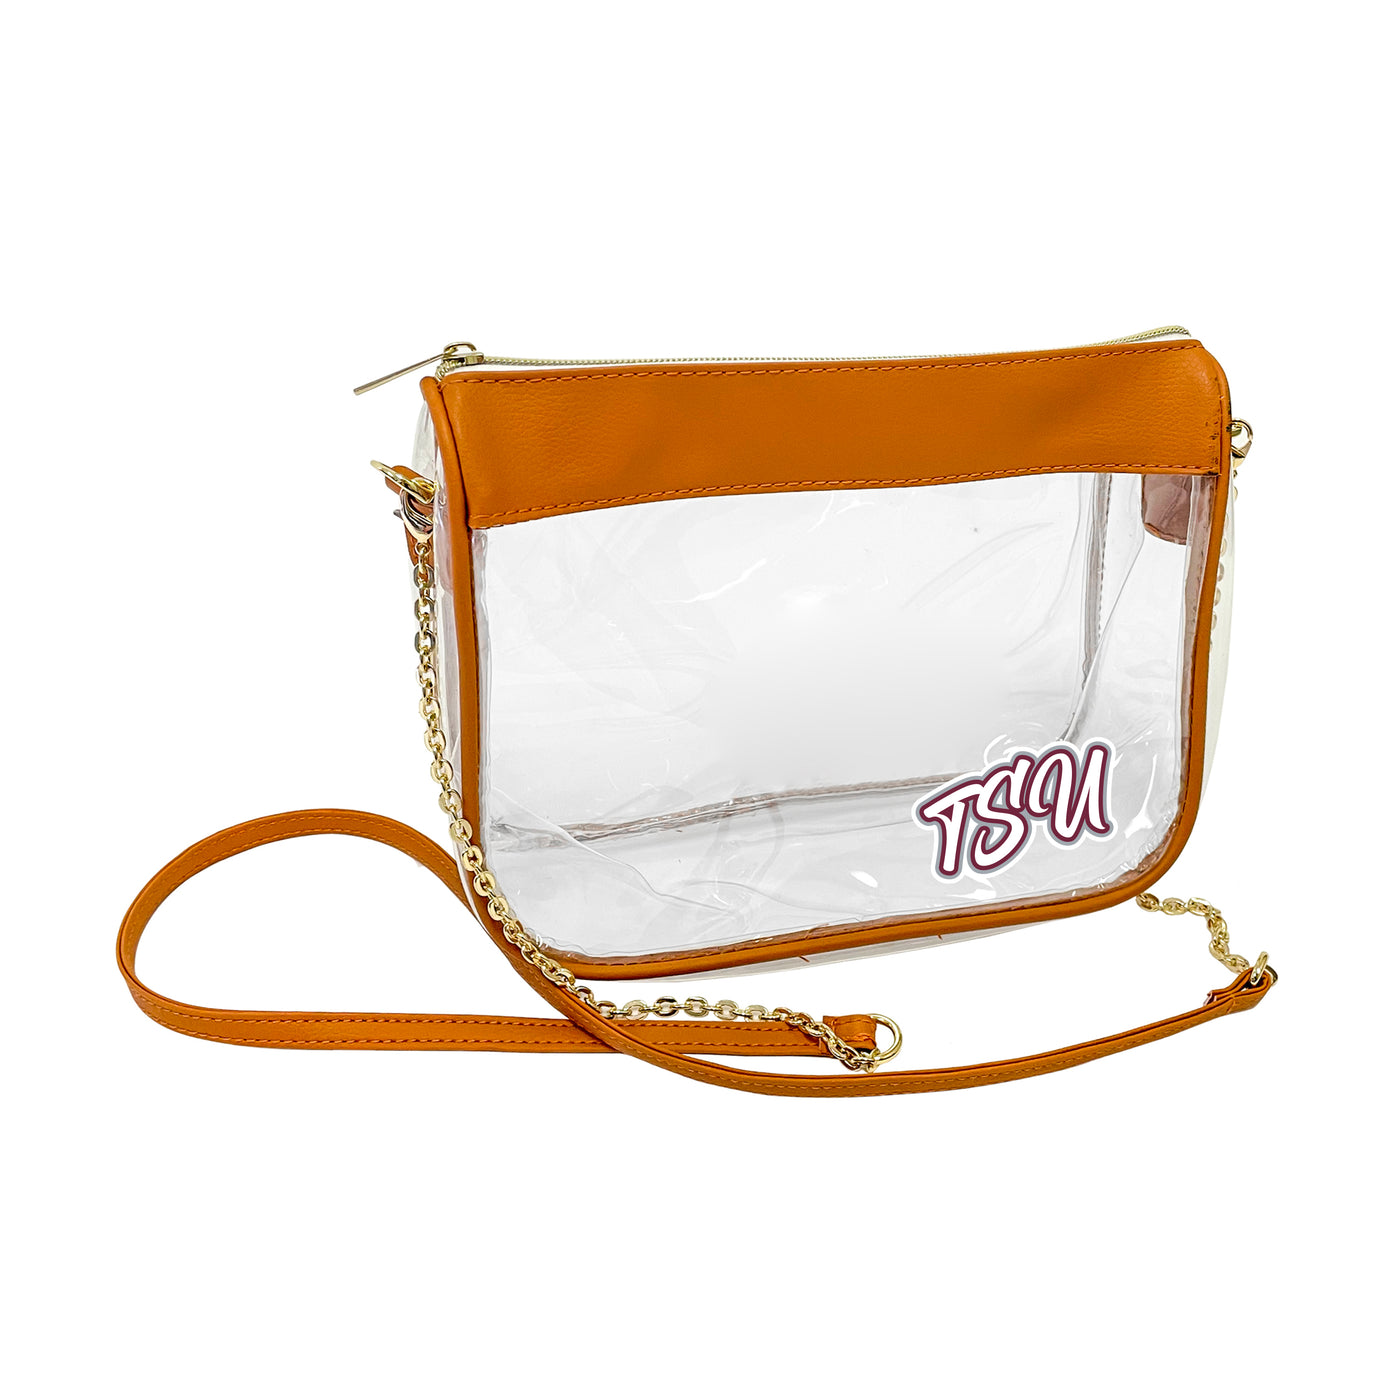 Texas Southern Hype Clear Bag